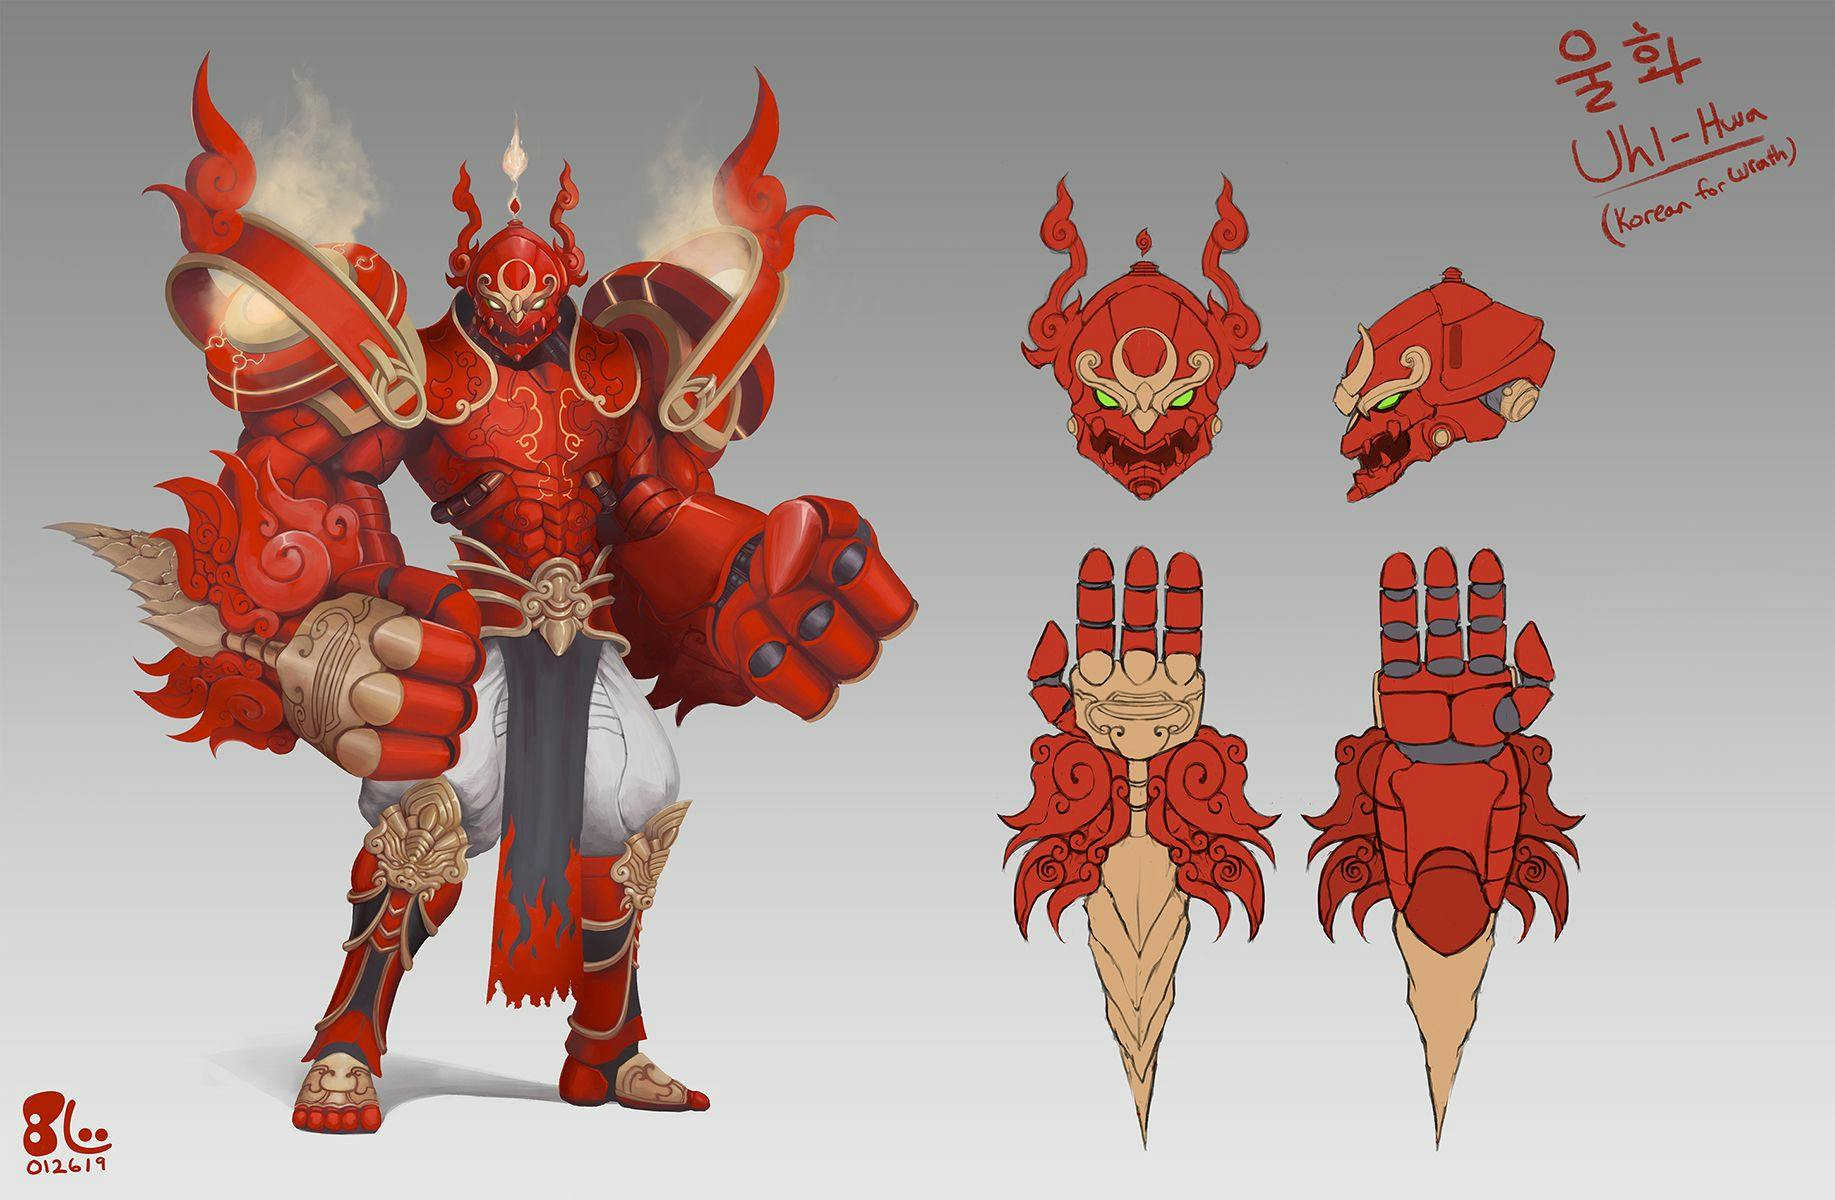 A red armored Uhi-Hwa